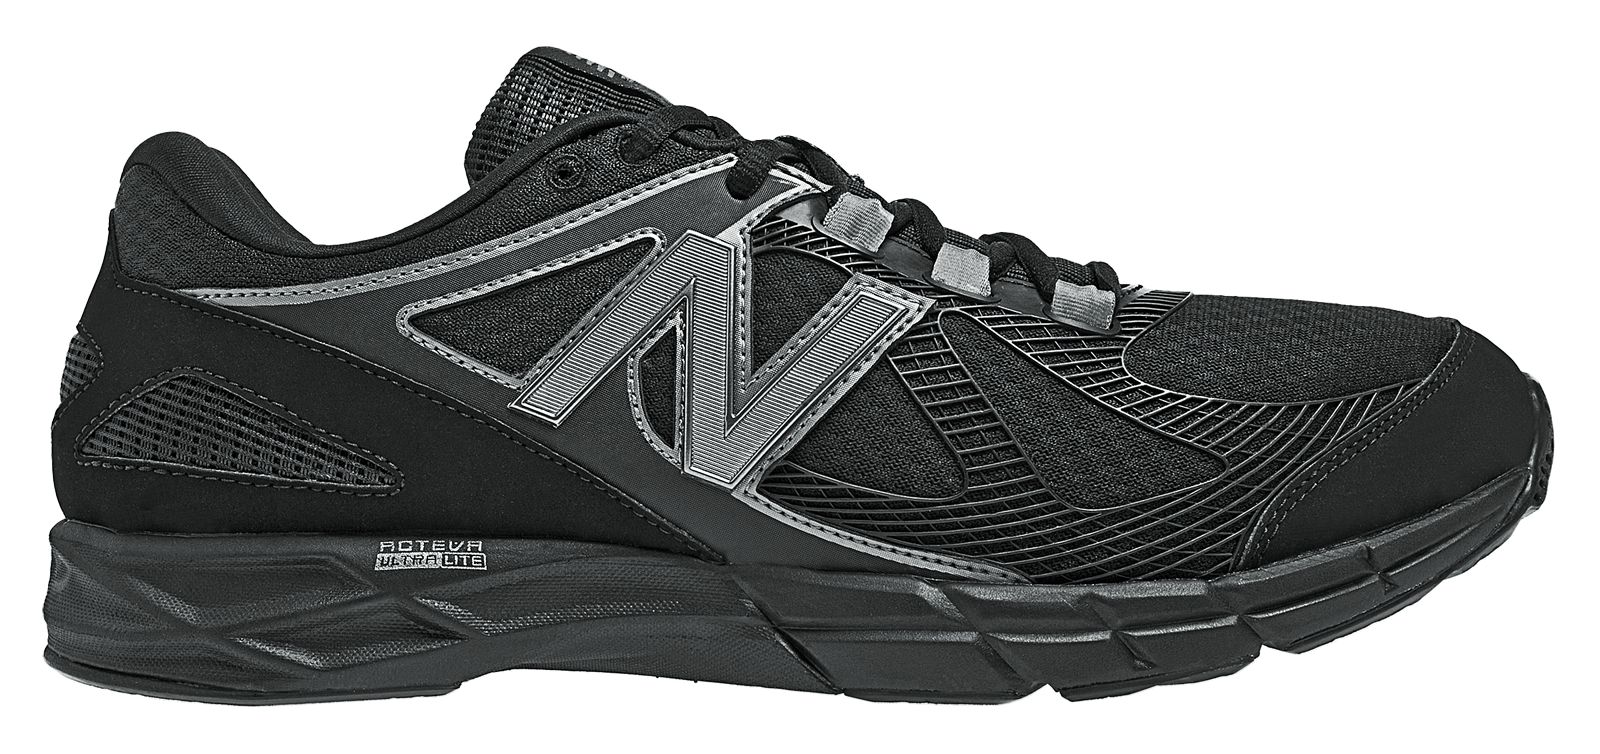 Off on MX877BR at Joe's New Balance Outlet